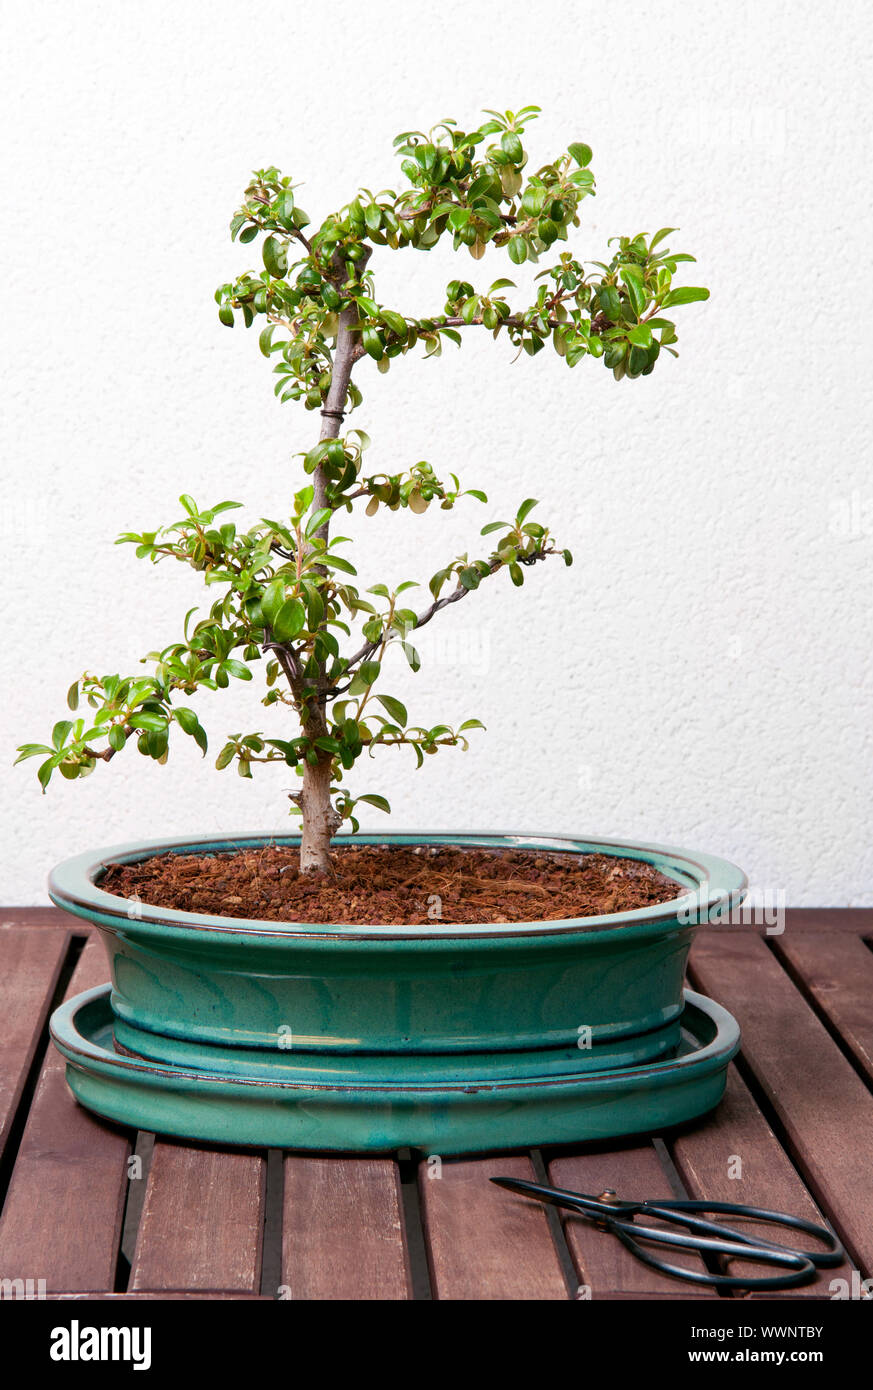 Ligustrum bonsai tree on a wood table, against a white wall Stock Photo